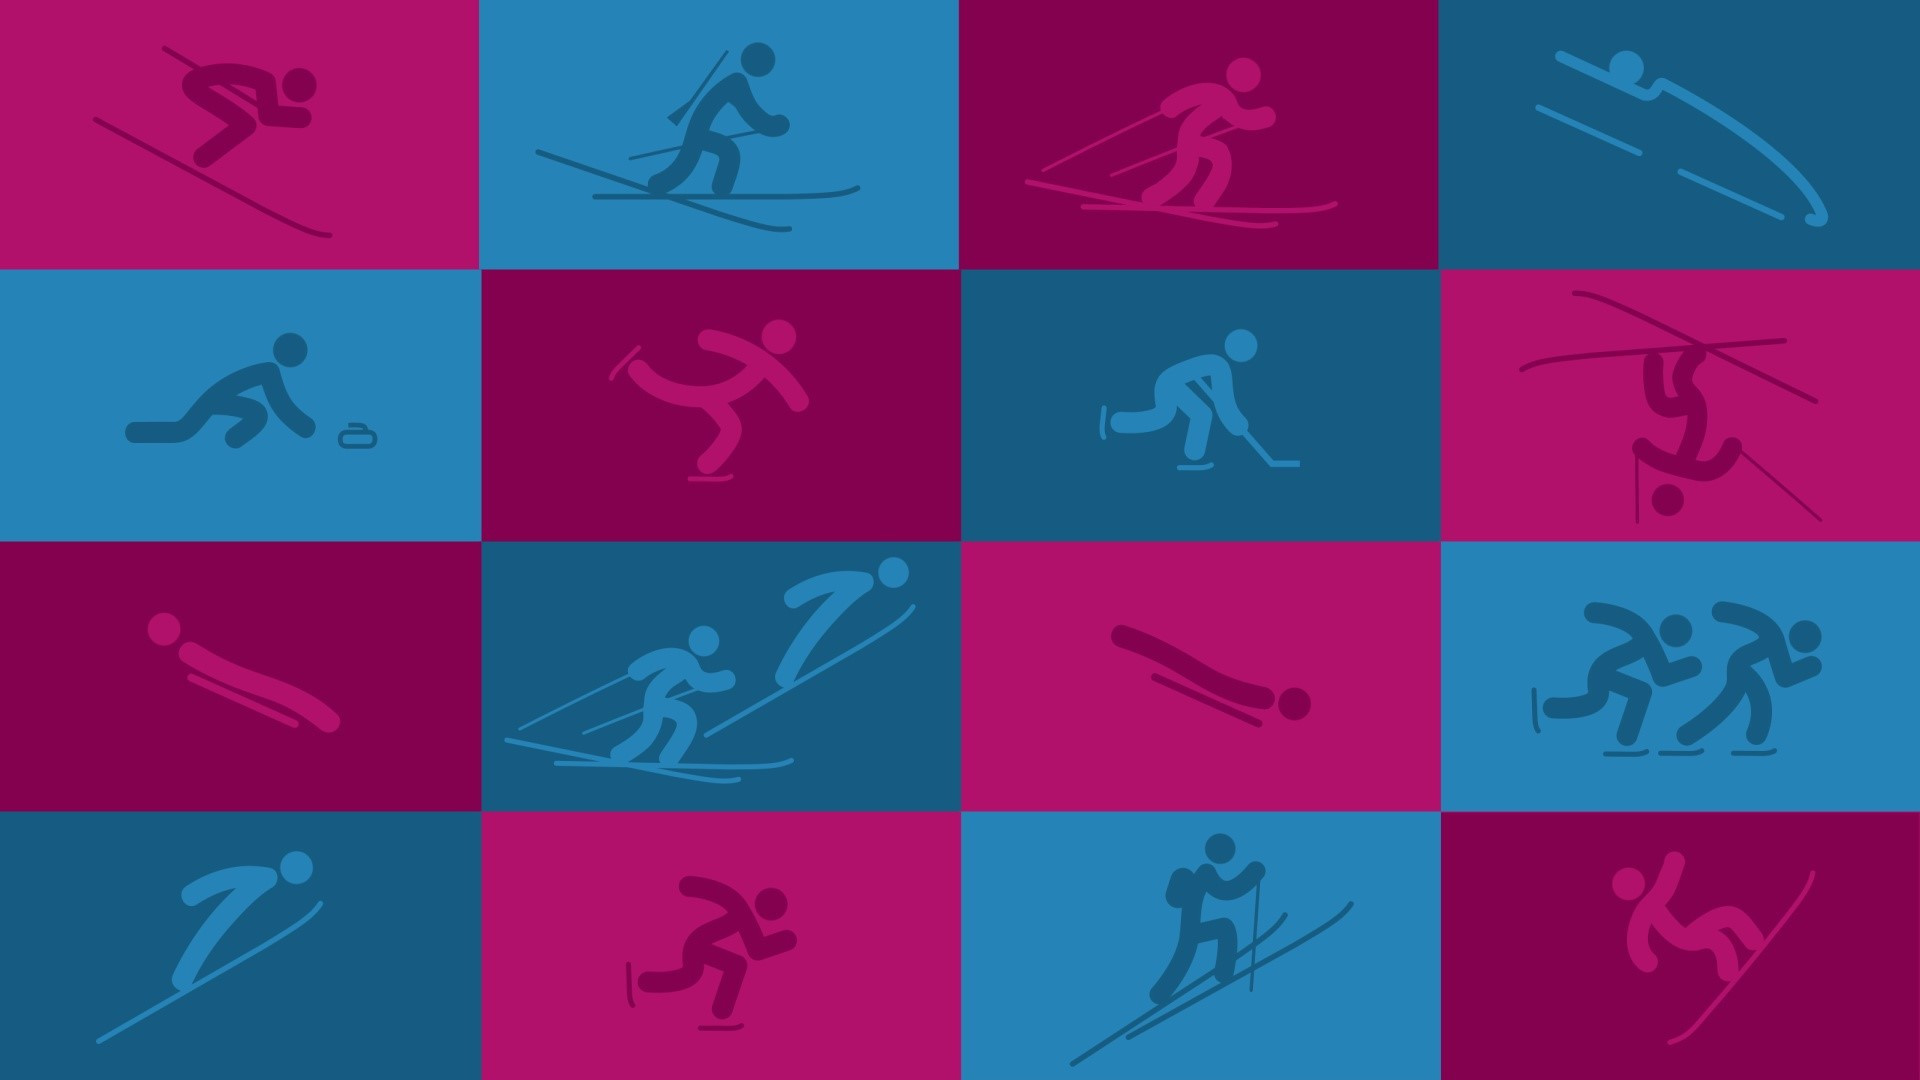 Lausanne 2020 unveil pictograms with 300 days to go